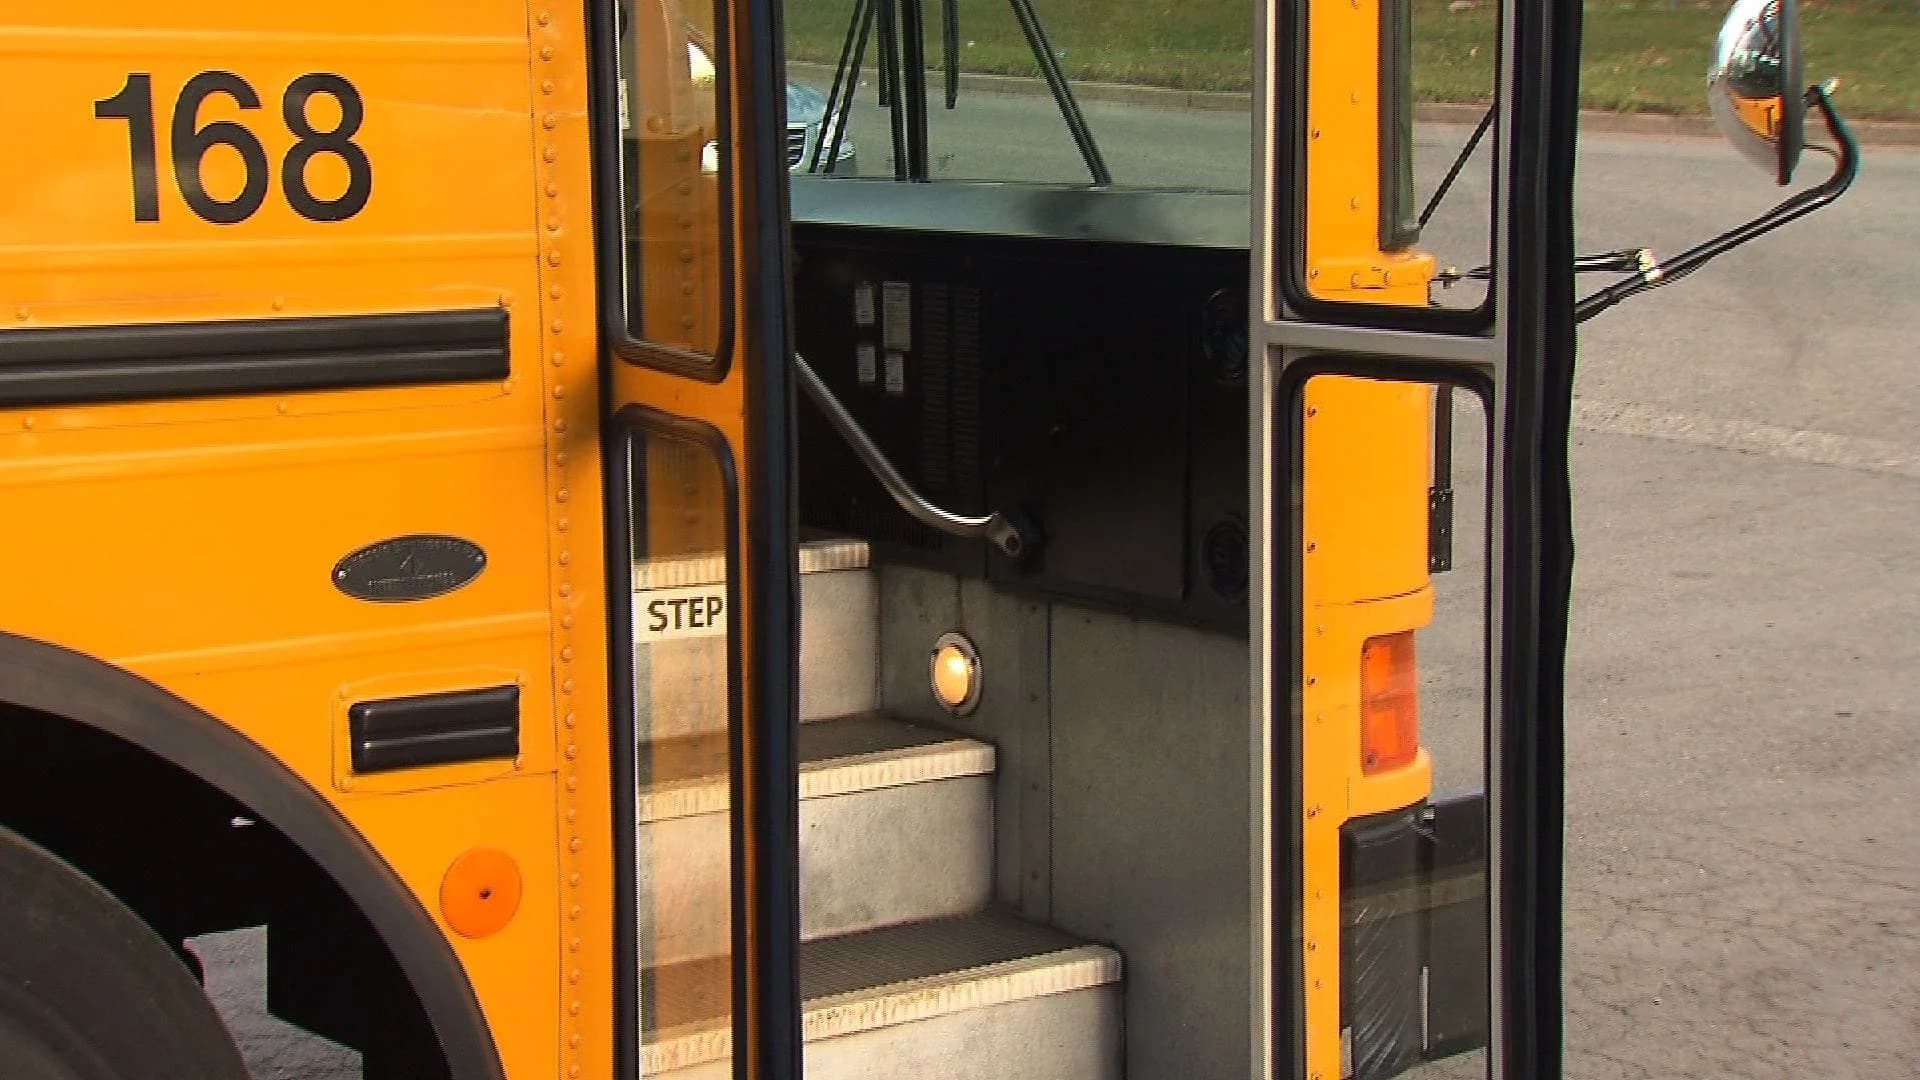 Prosecutor: Bus driver accused of molesting 2 students during game of ‘hide-and-seek’